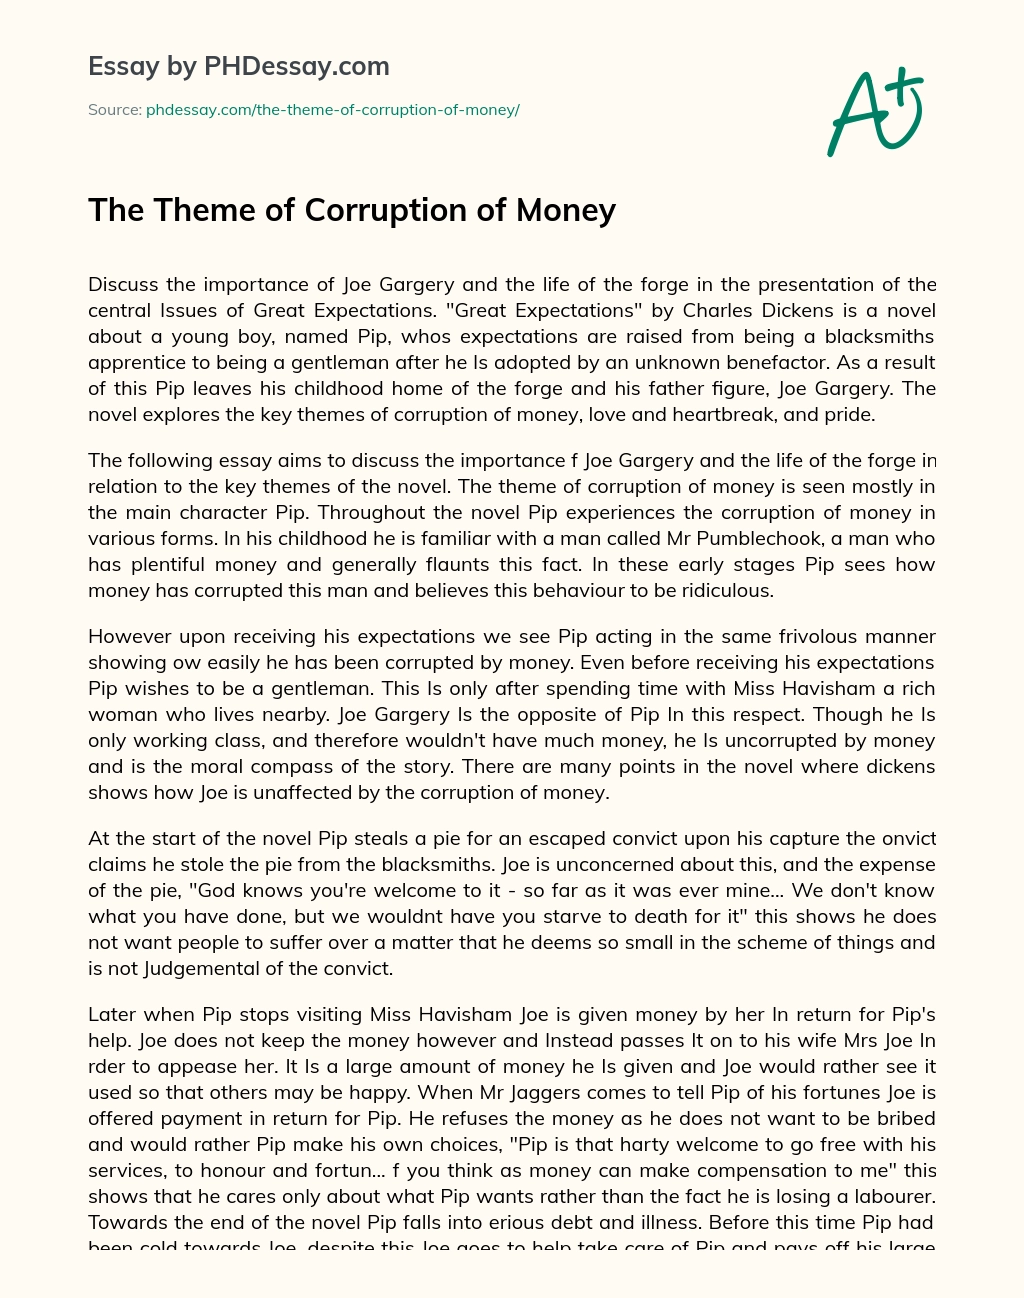 The Theme of Corruption of Money essay